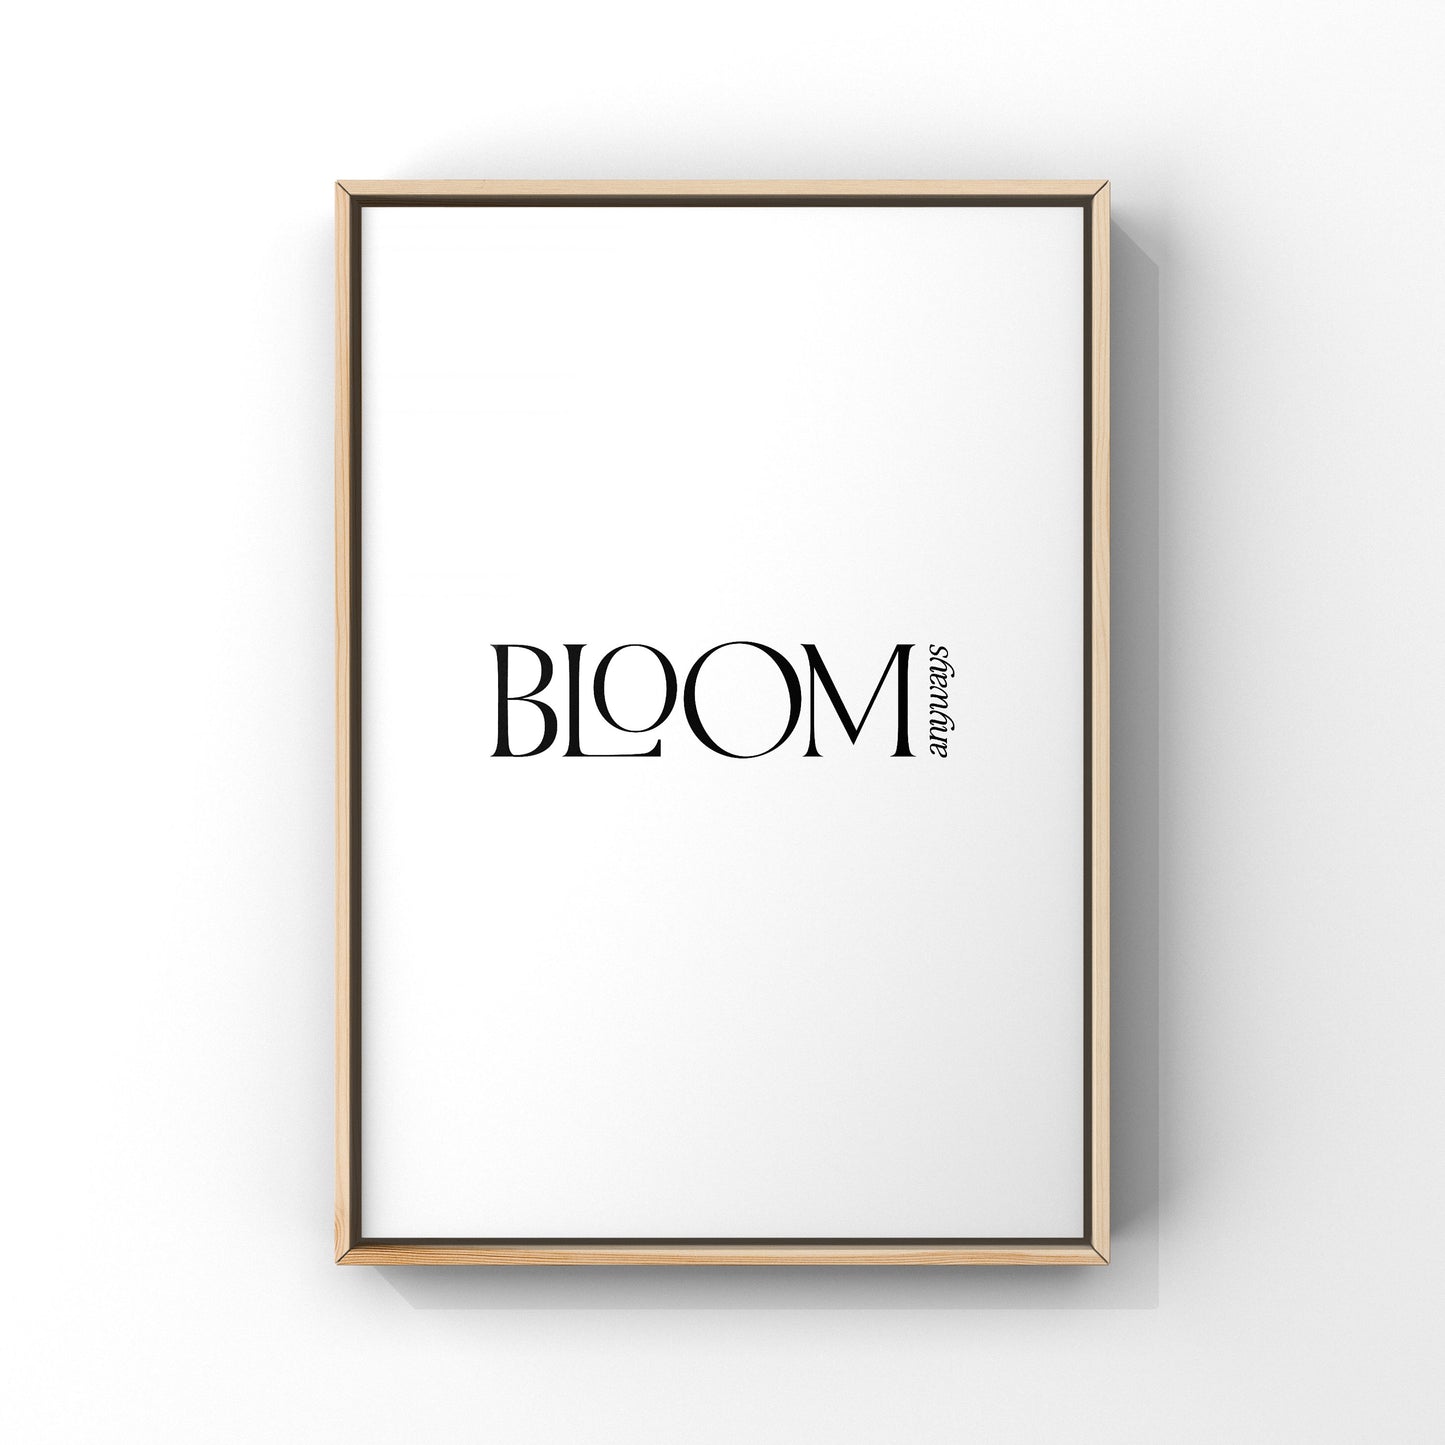 Bloom anyways art print, Flower quote, Floral Wall Decor, Flower Wall Art, Inspirational Quote